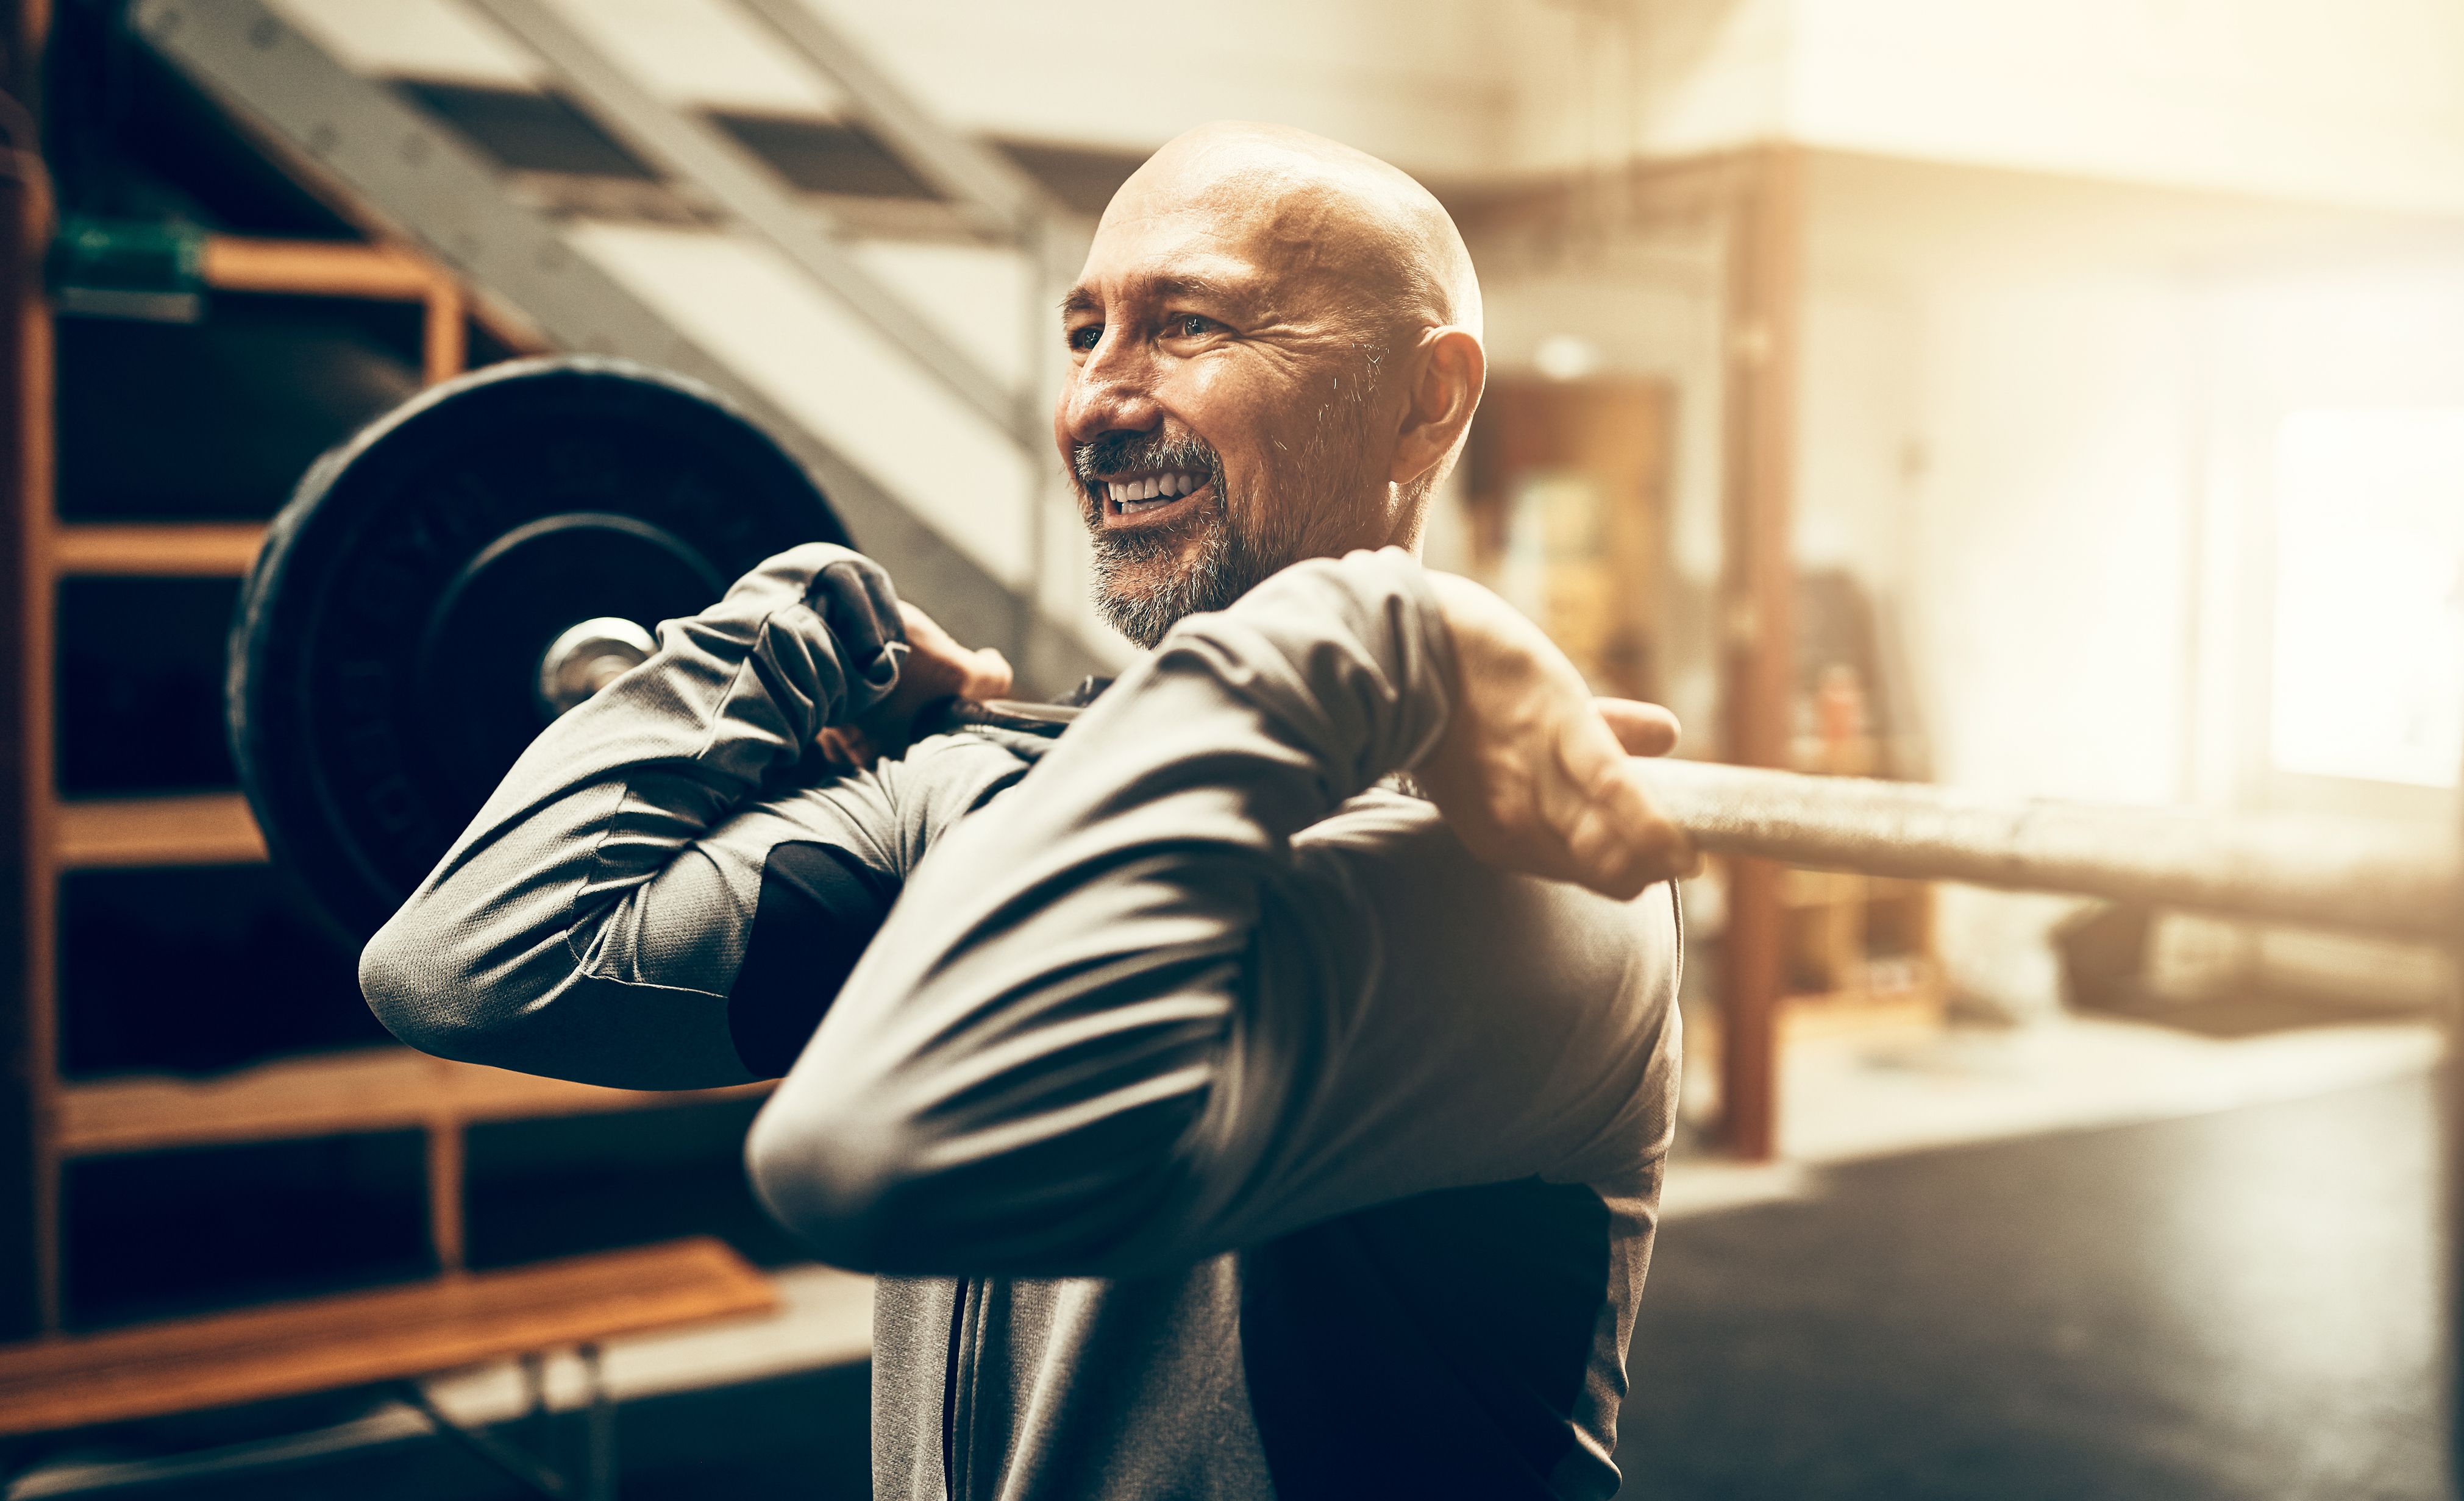 At what age do men stop getting stronger?